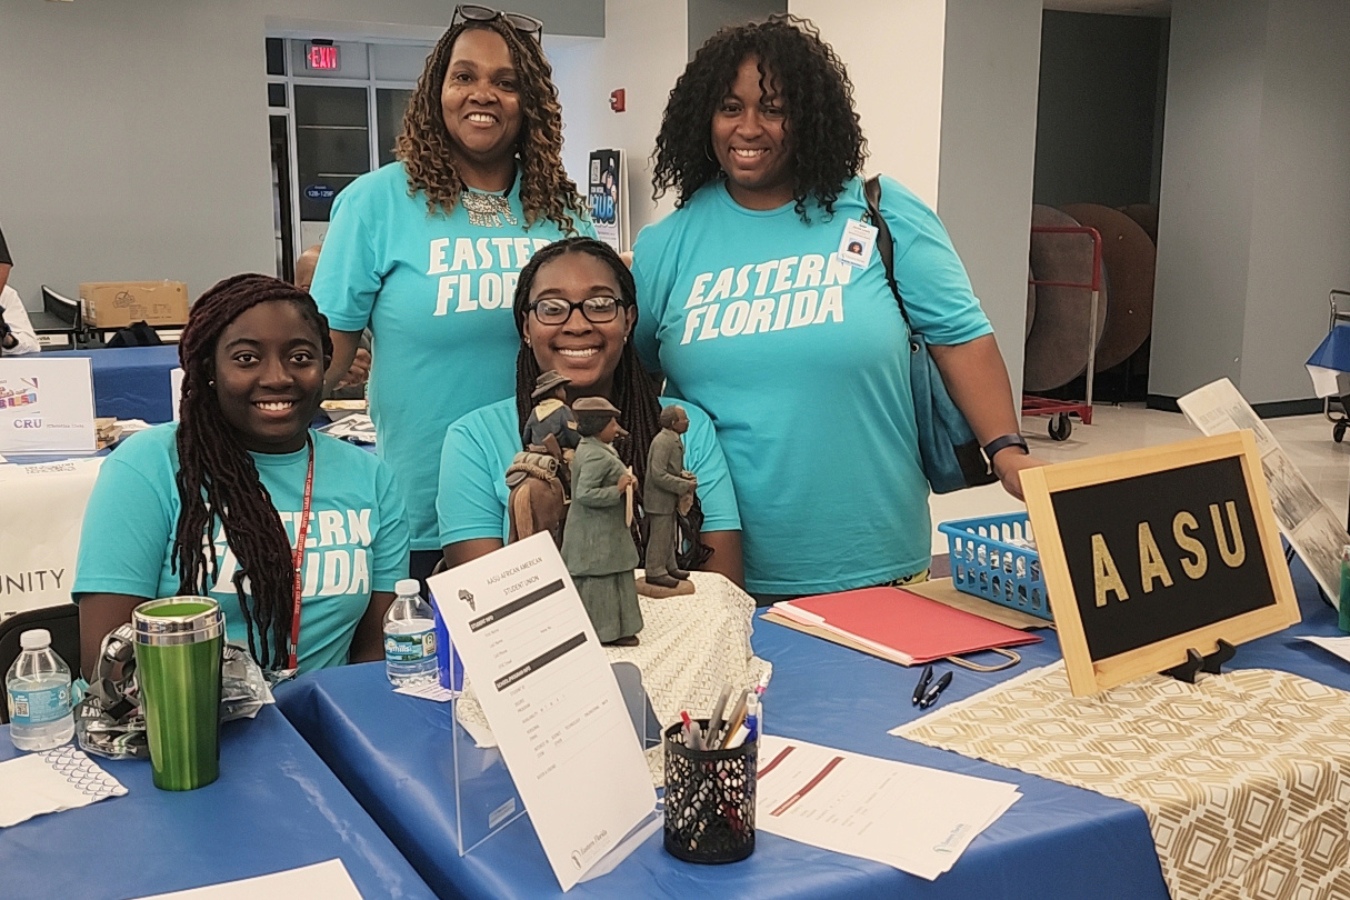 Students wearing Eastern Florida shirts at a booth during a Welcome Back event to promote their student club, the African American Student Union.